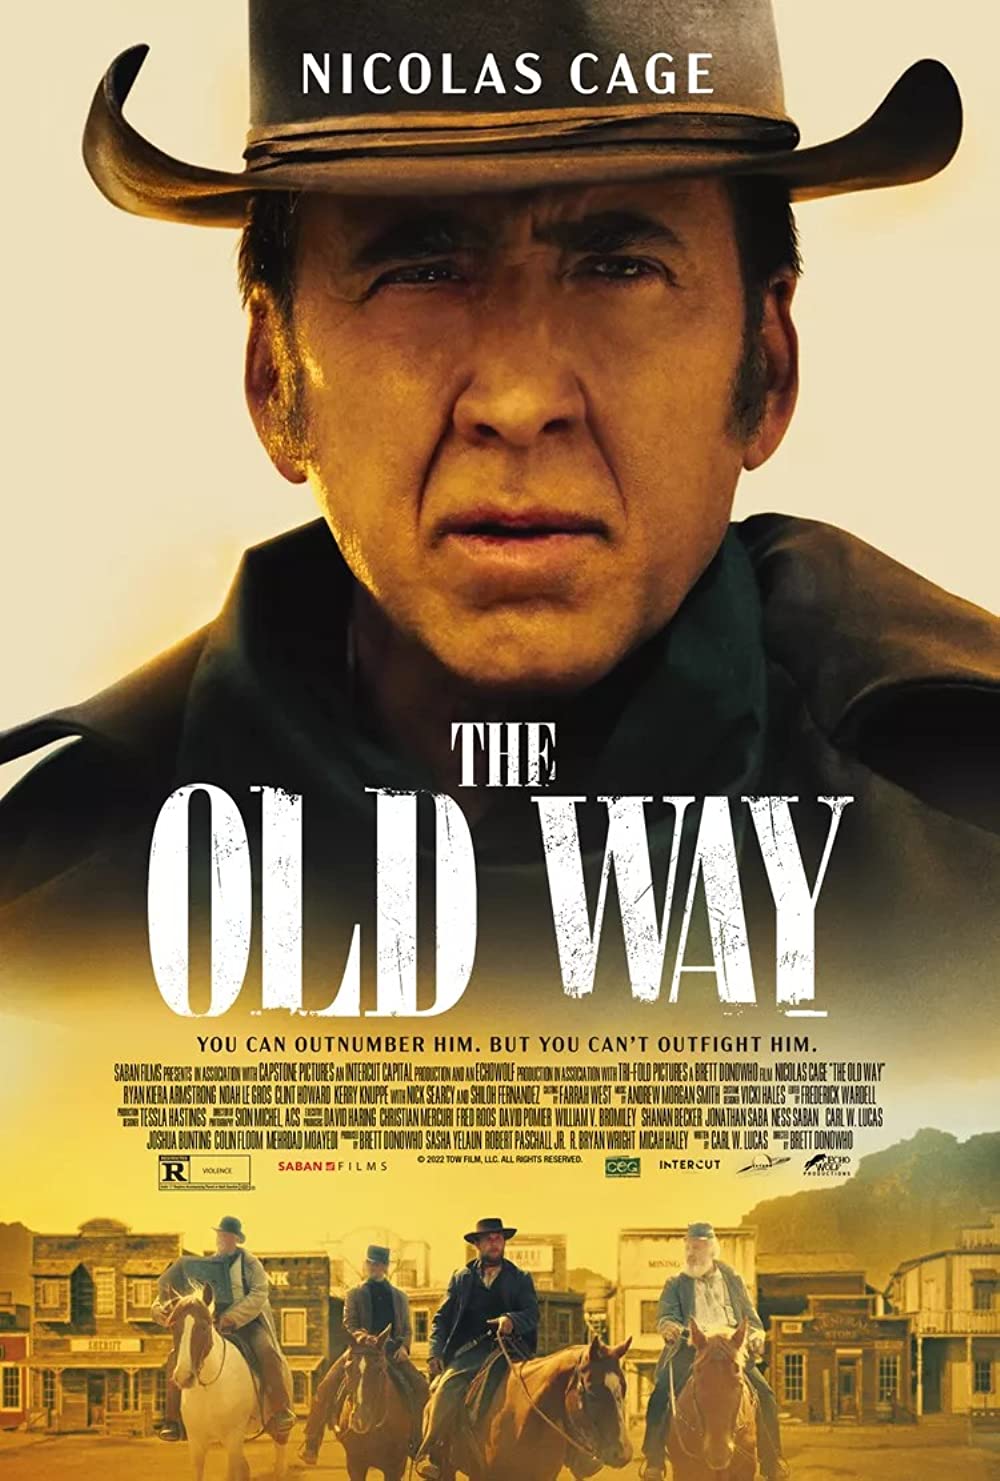 The Old Way Imdb The Old Way - A Movie Guy